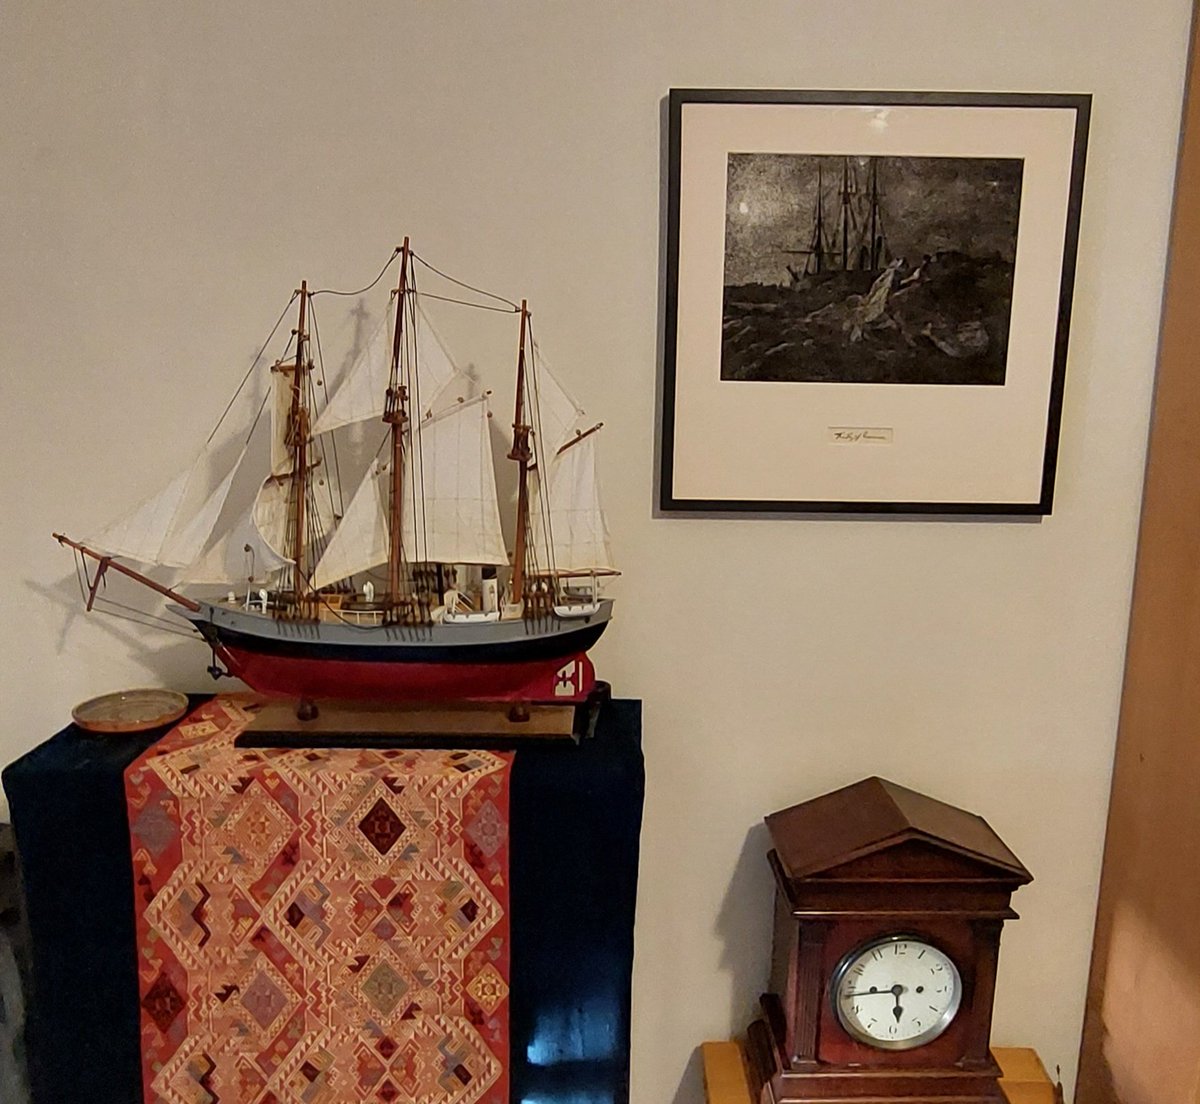 My print of 'Fram in the Winter Night' by Fridtjof #Nansen in its place. Very proud to know that its price (a donation toward the future building at @FramMuseum*) will help highlight the climatic/environmental importance of the poles and #polar #science *best museum in the world